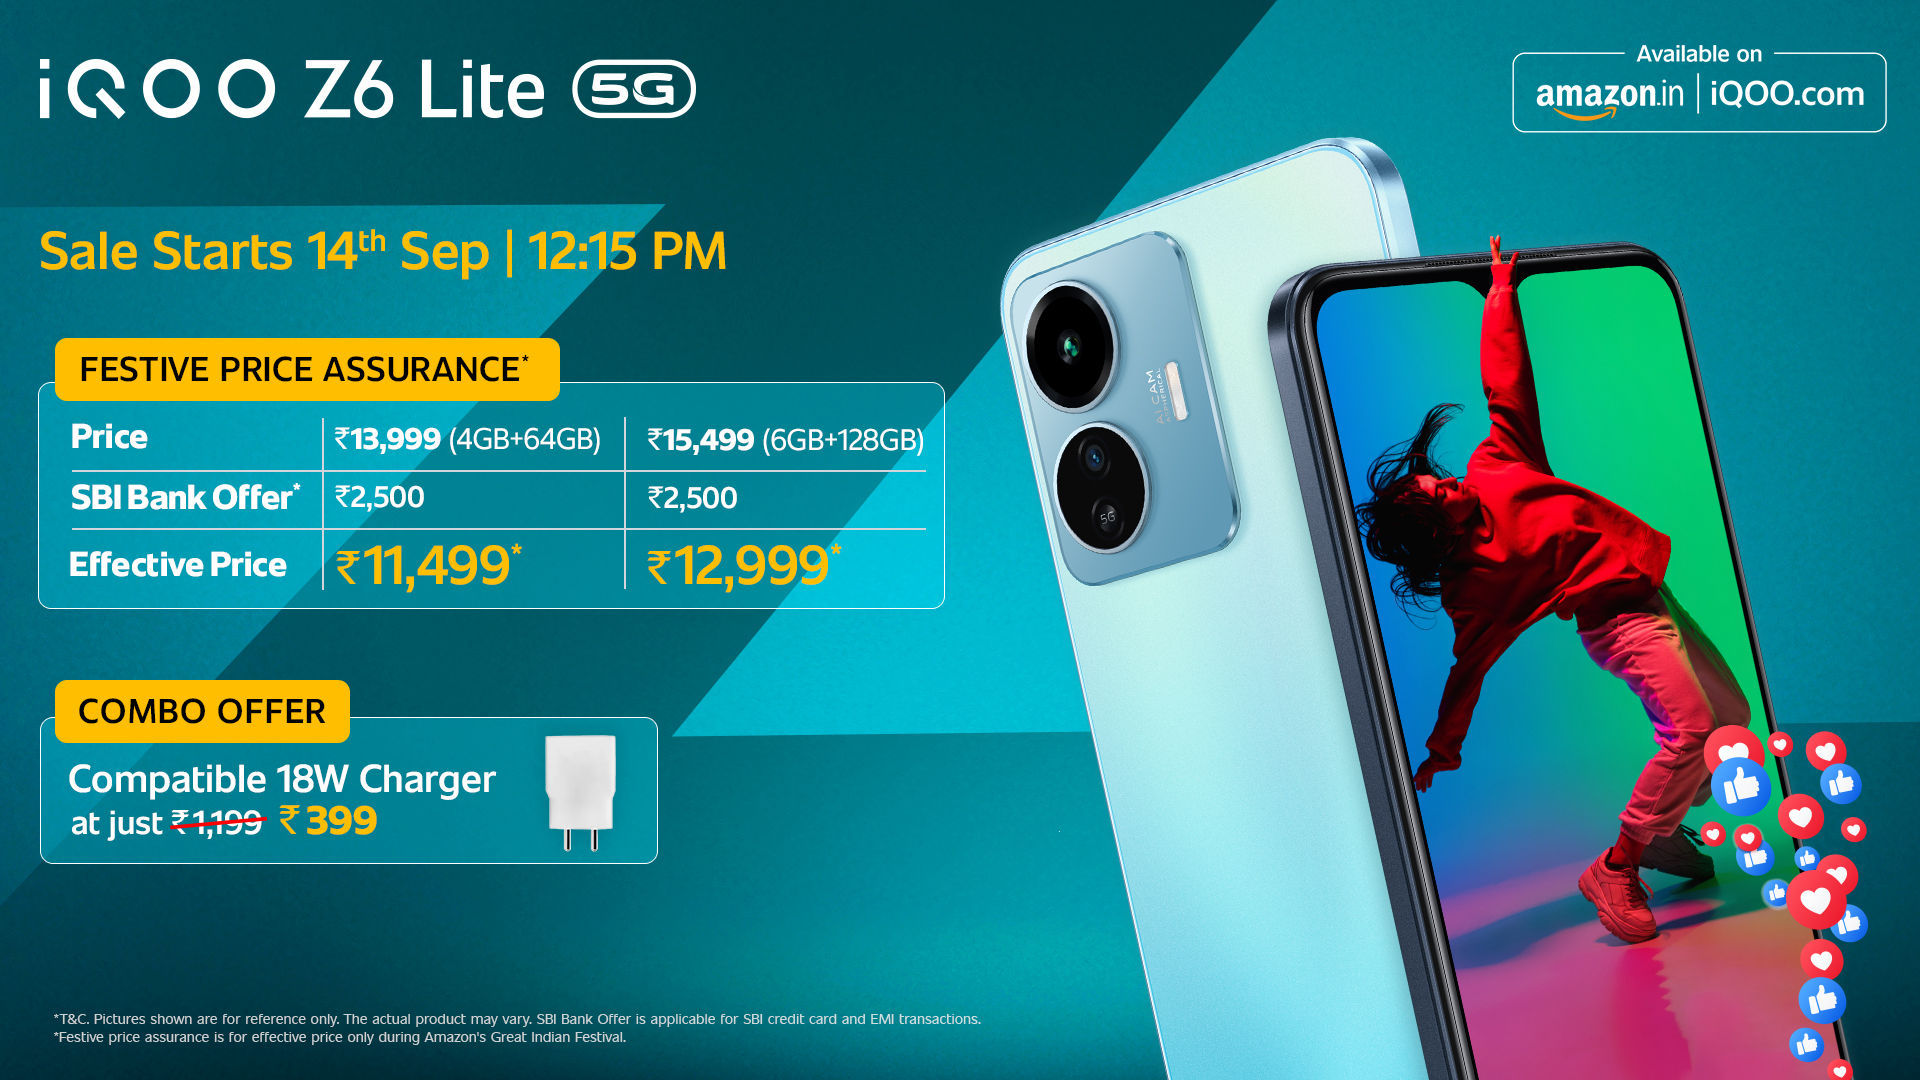 iQOO Z6 Lite Price and Offers